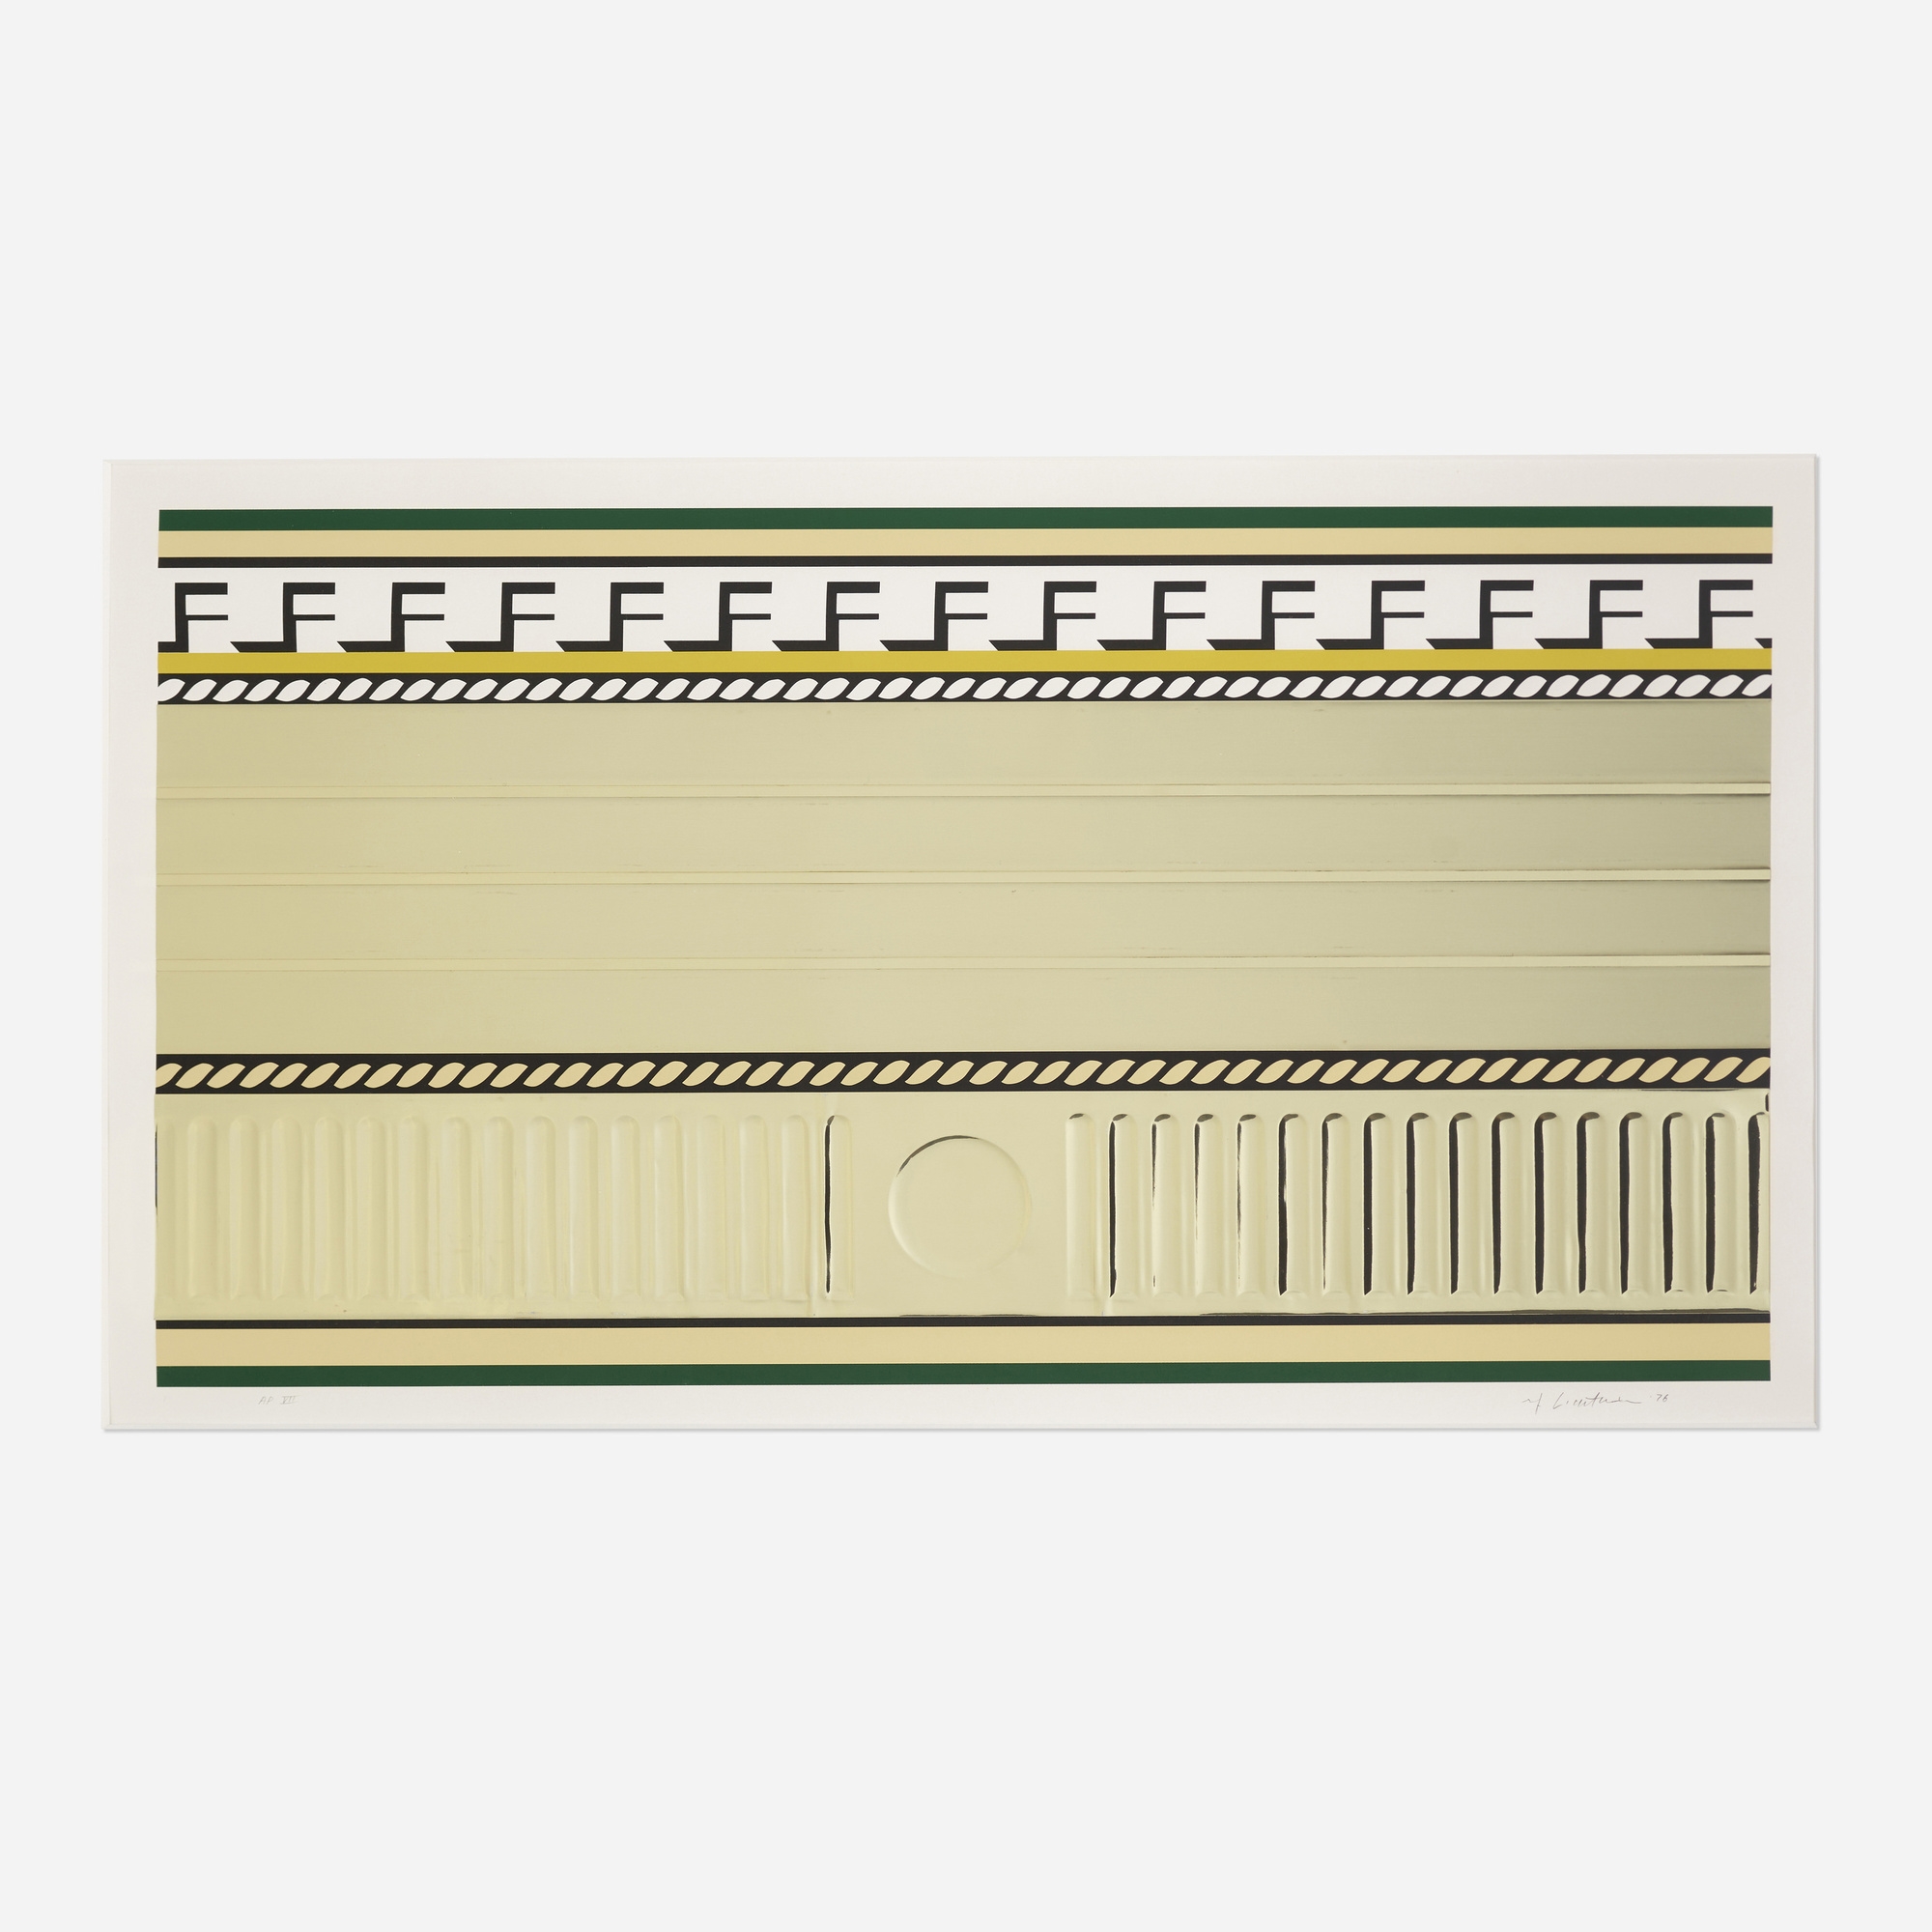 Artwork by Roy Lichtenstein, Entablature III from the Entablature series, Made of screenprint, lithograph and collage in colors with embossing on BFK Rives